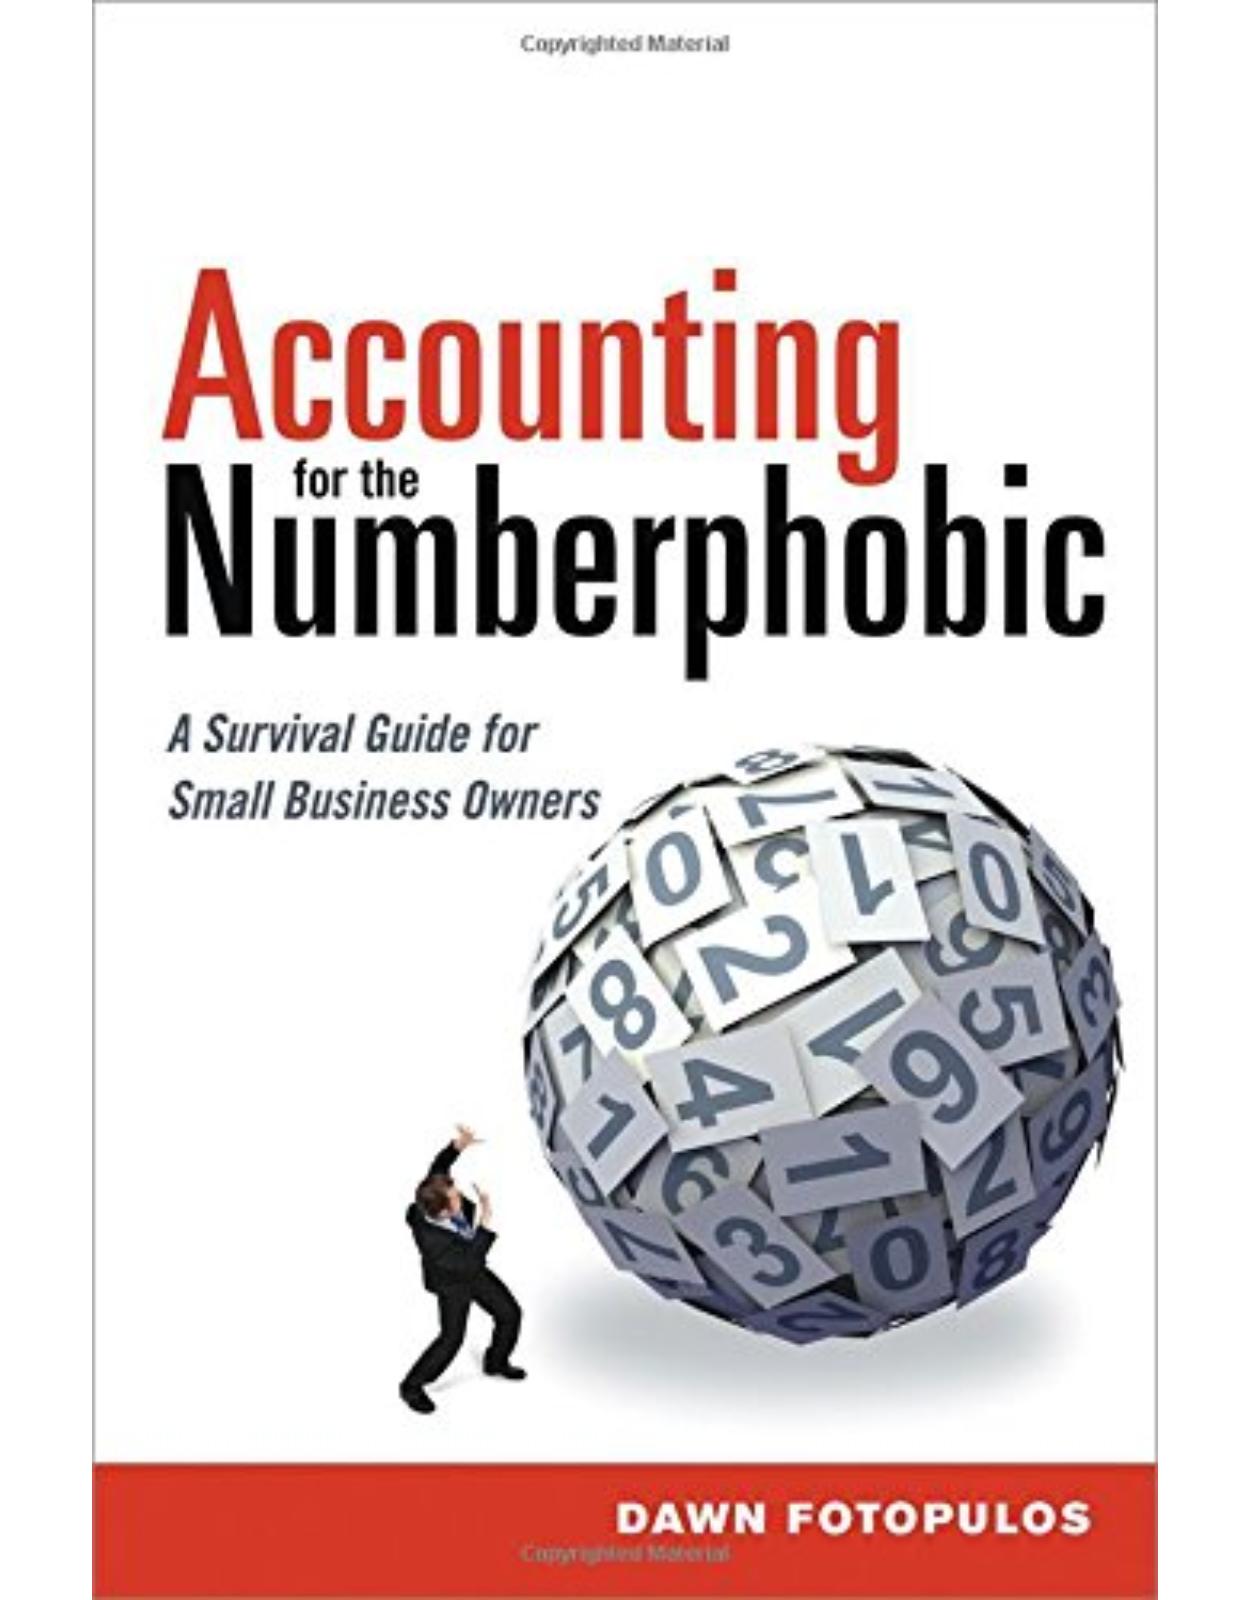 Accounting for the Numberphobic: A Survival Guide for Small Business Owners 